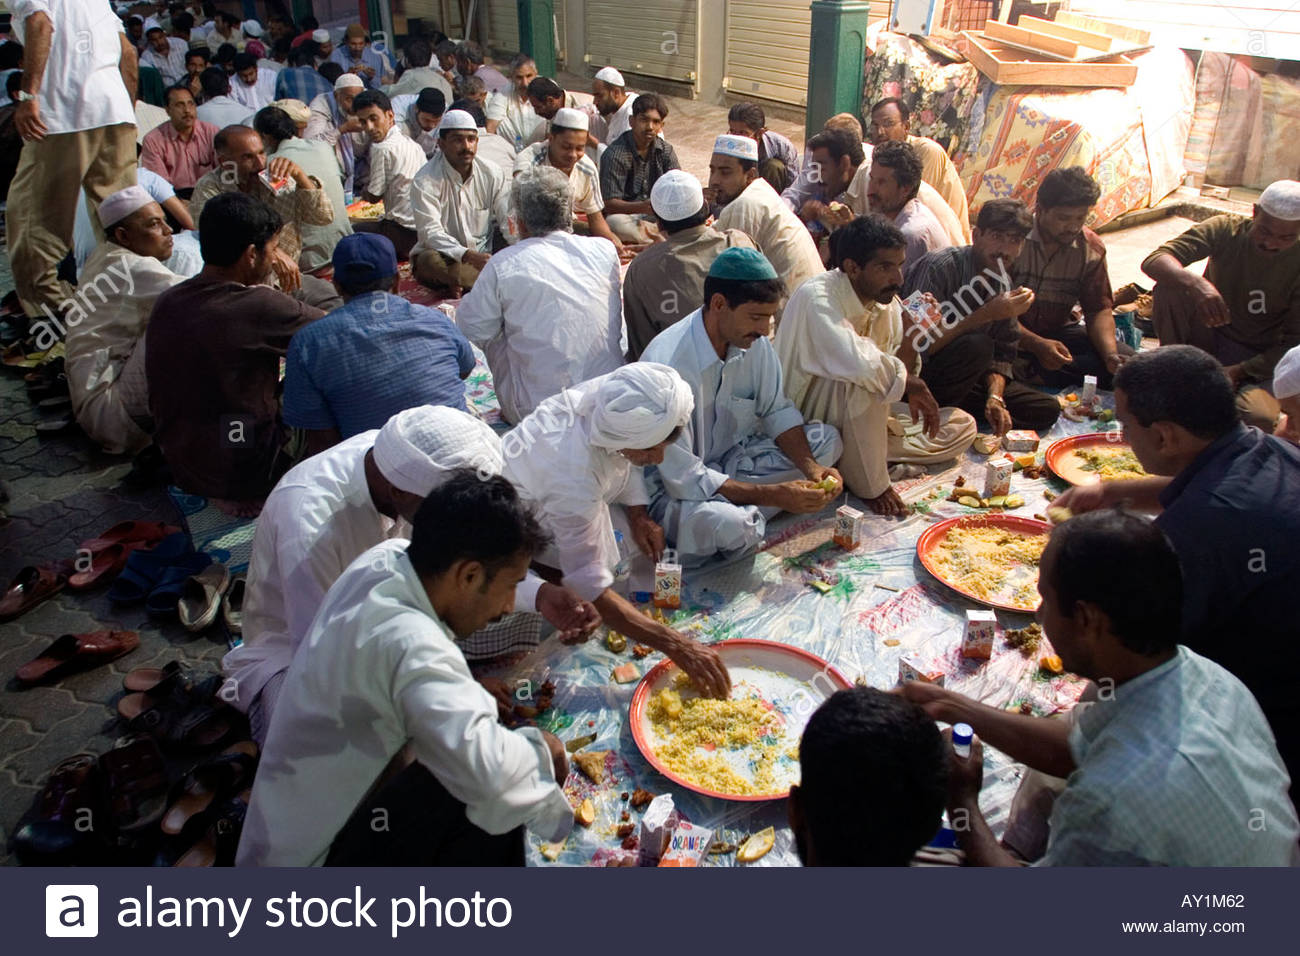 muslim-men-eats-together-outside-a-mosque-at-iftar-the-evening-meal-AY1M62.jpg